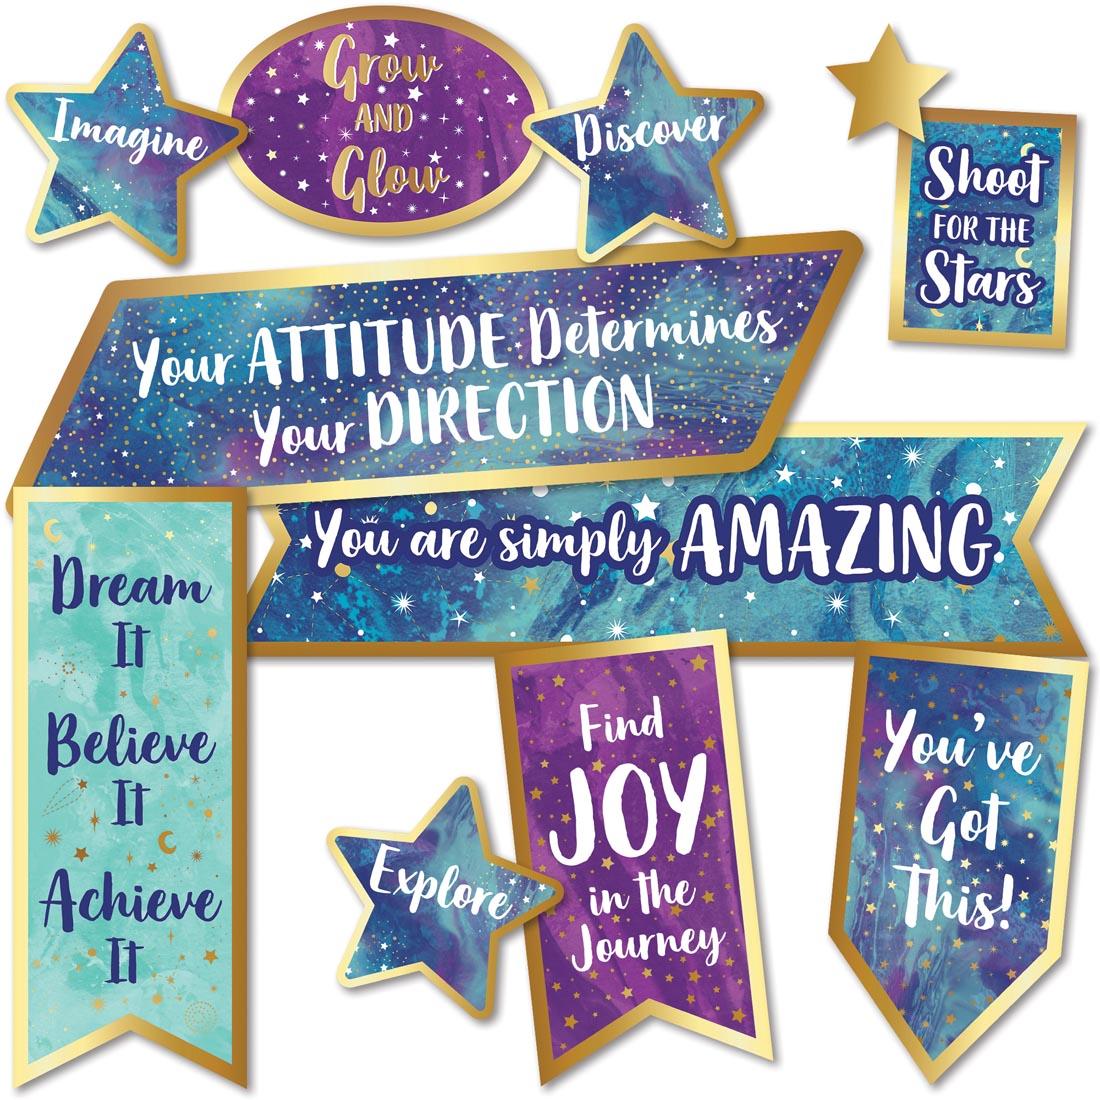 Galaxy Motivational Signs Mini Bulletin Board Set with quotes like Your Attitude Determines Your Direction and Find Joy in the Journey